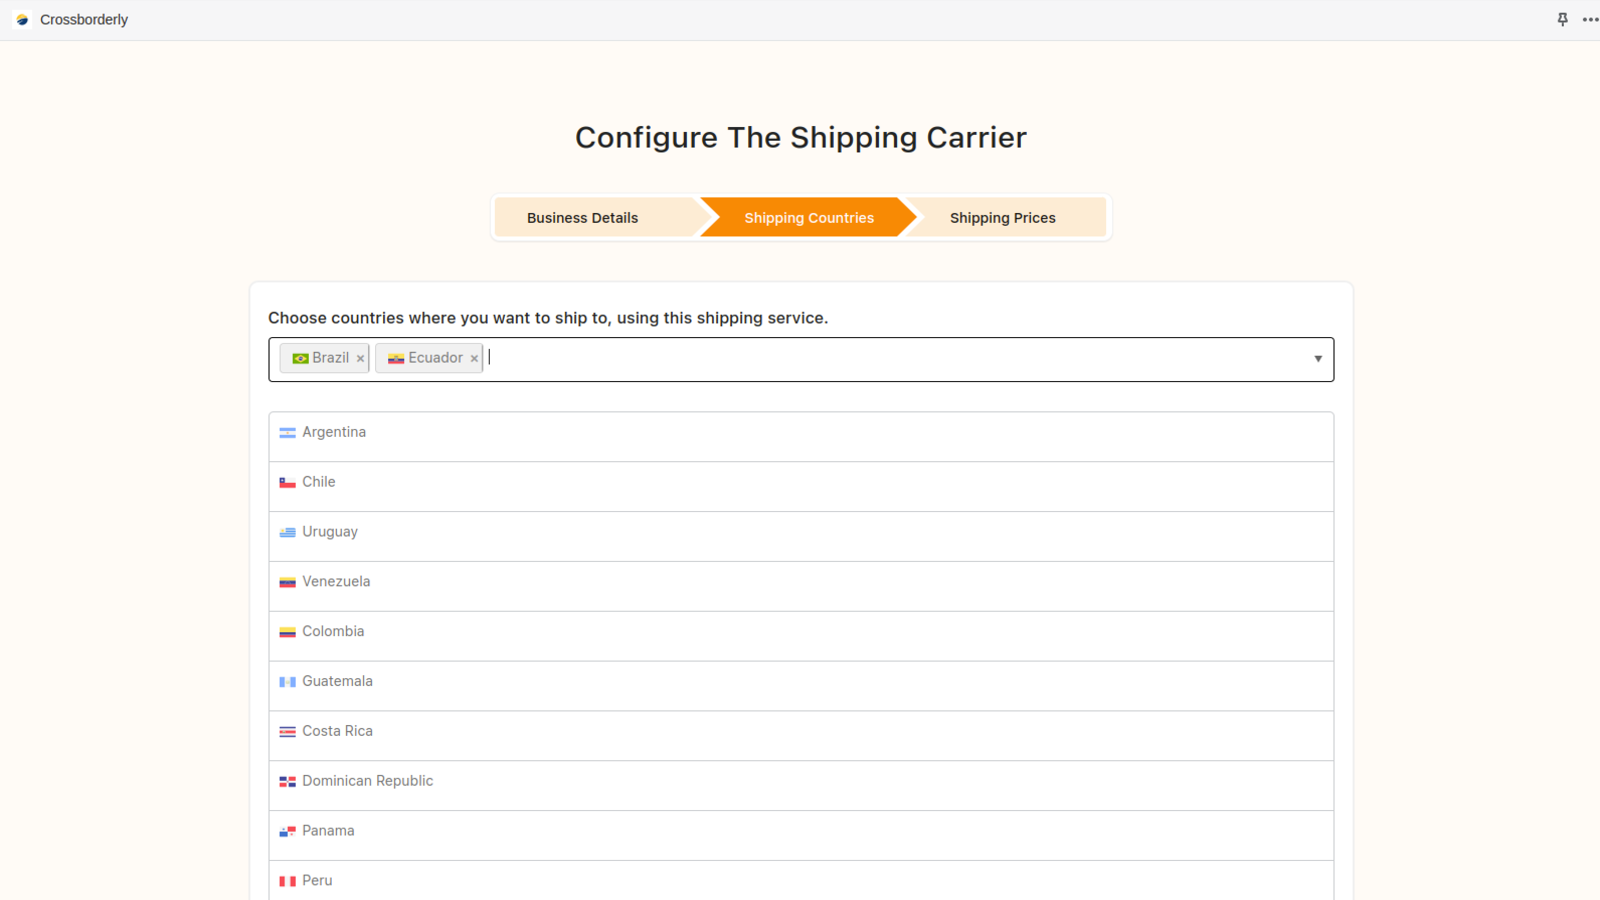 Select countries to ship to